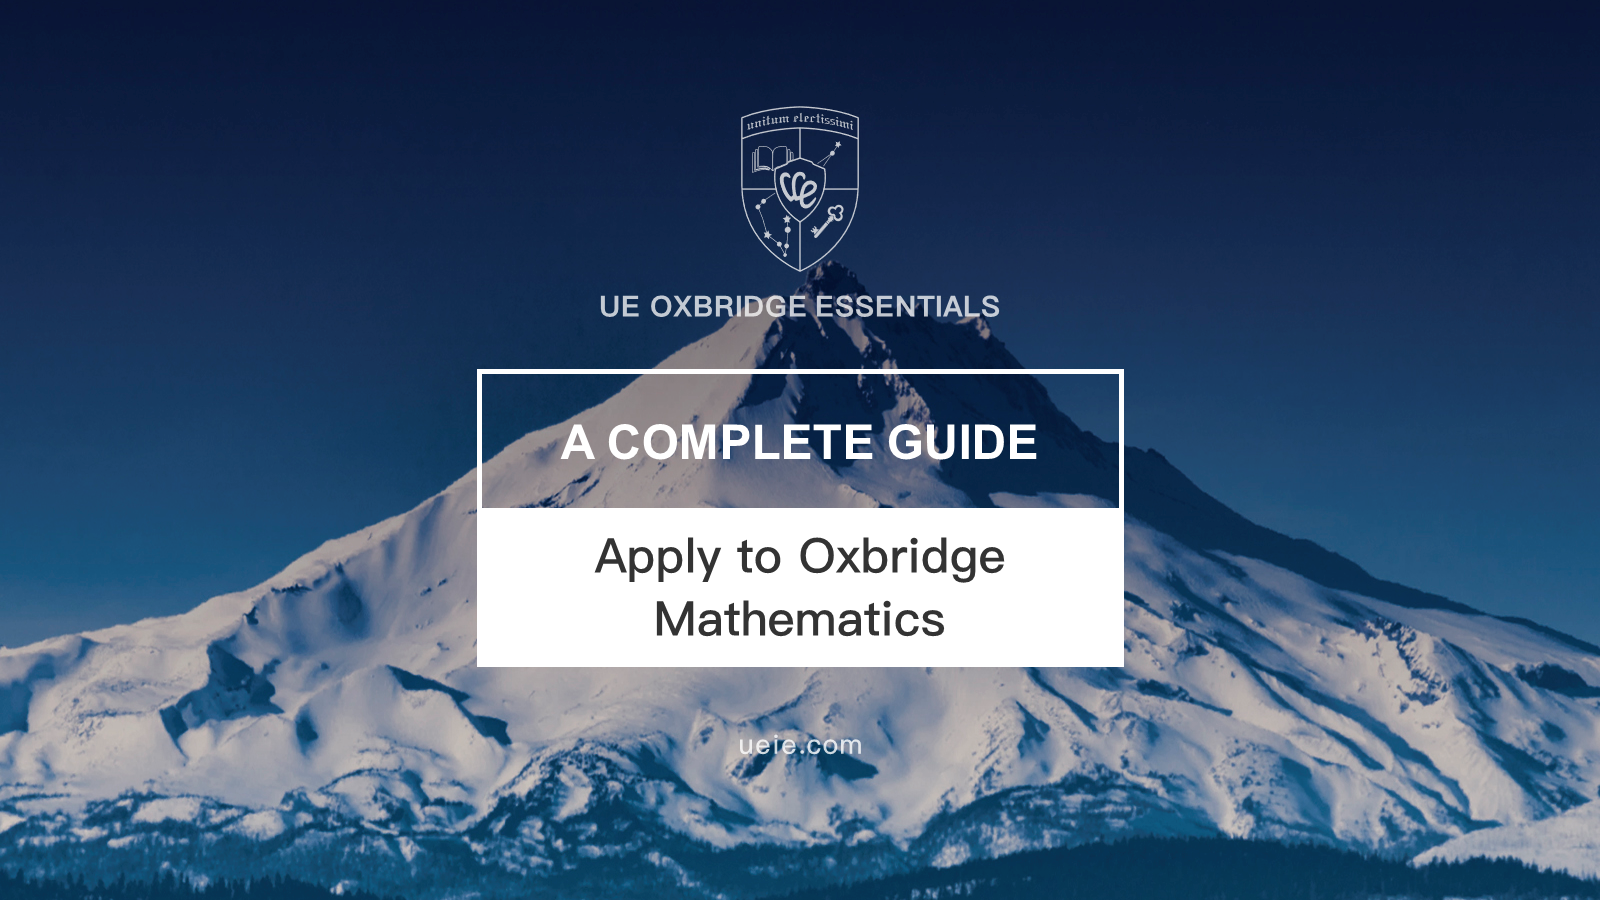 Apply to Oxbridge Mathematics - A Complete Guide